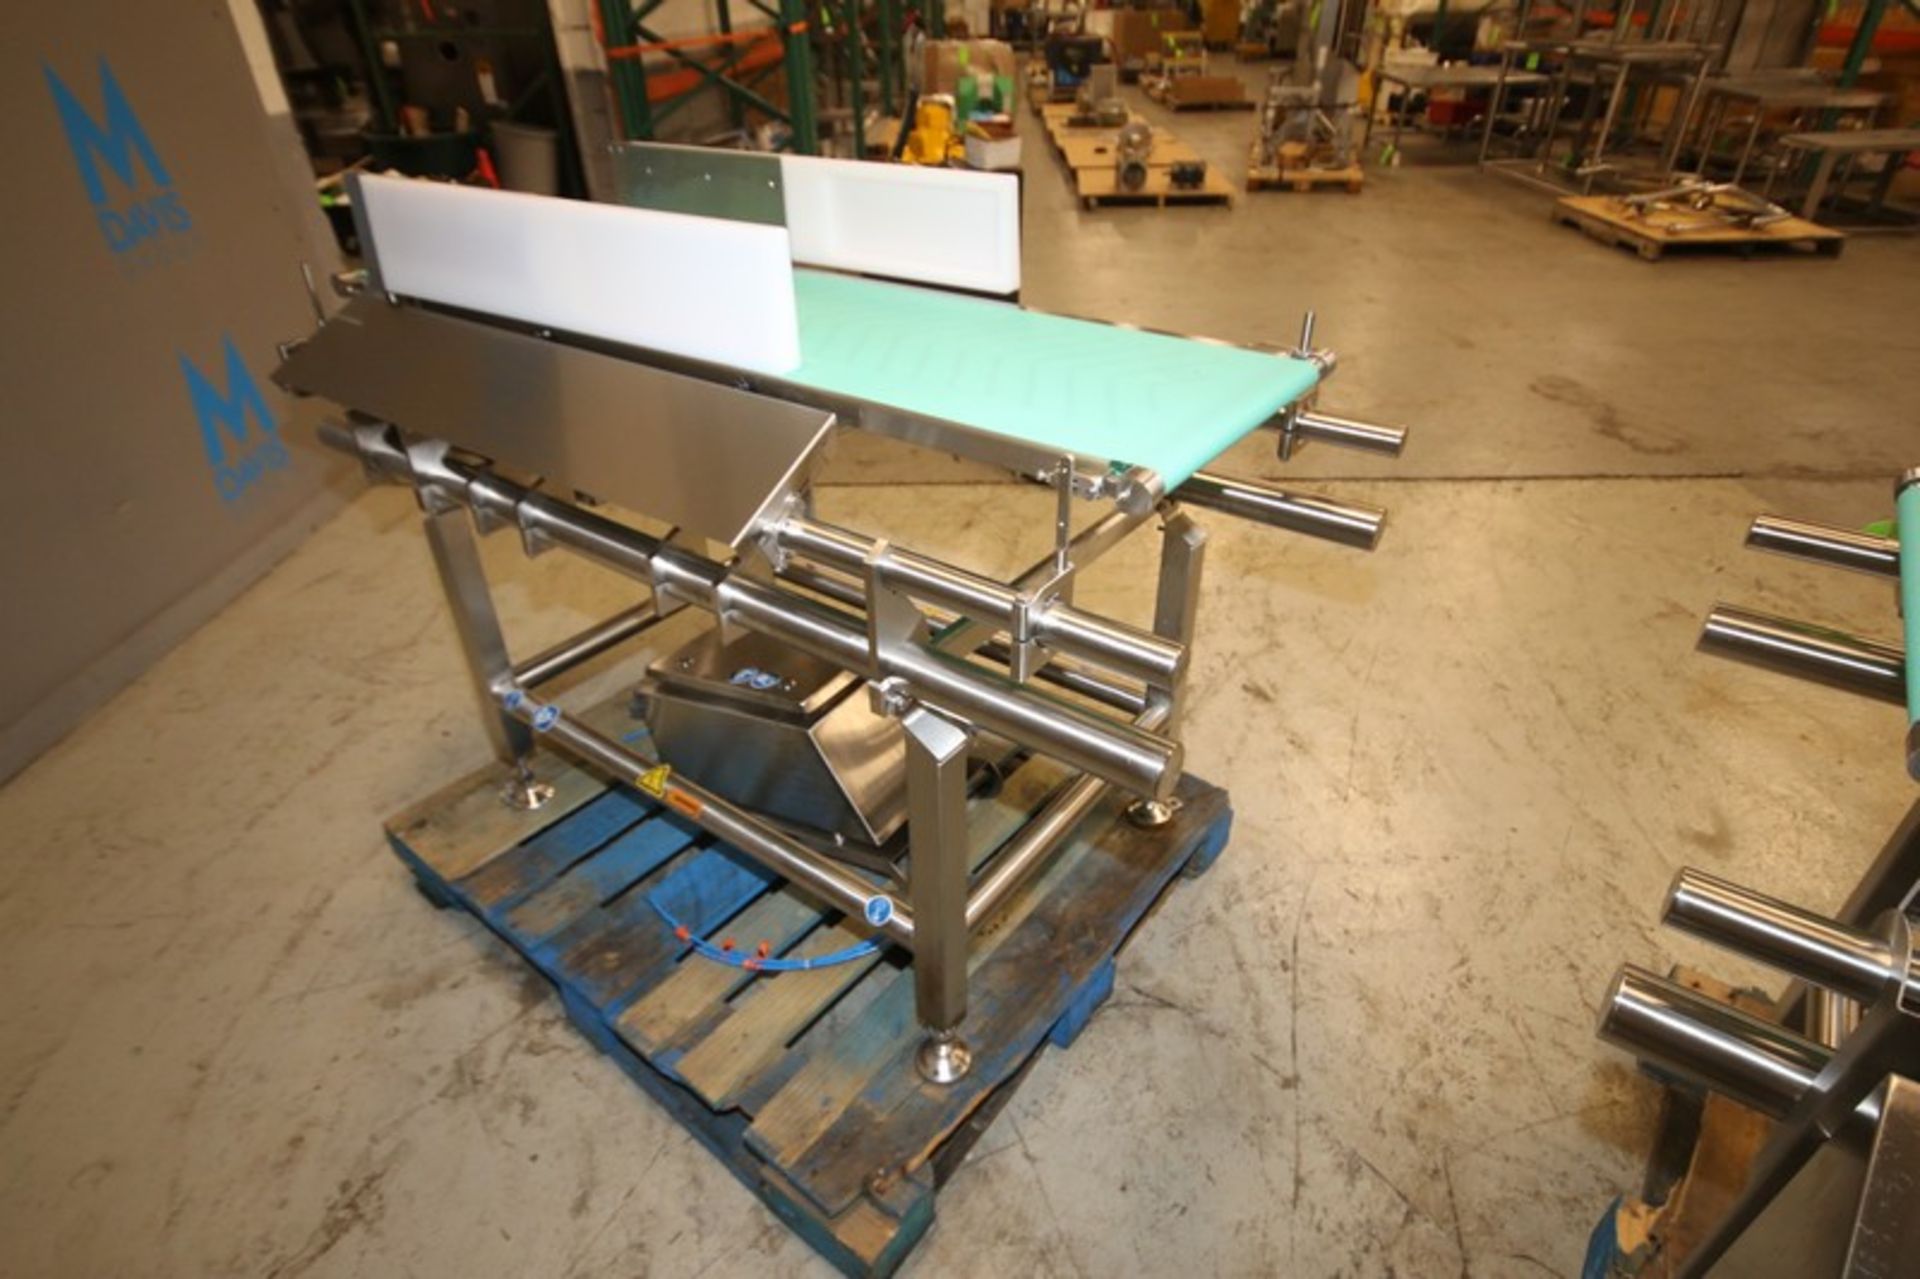 Lot of (2) 56" L x 34" H S/S Belt Conveyors with 15.5" W Belts, Lane Orienters, (Possibly Check - Image 6 of 7